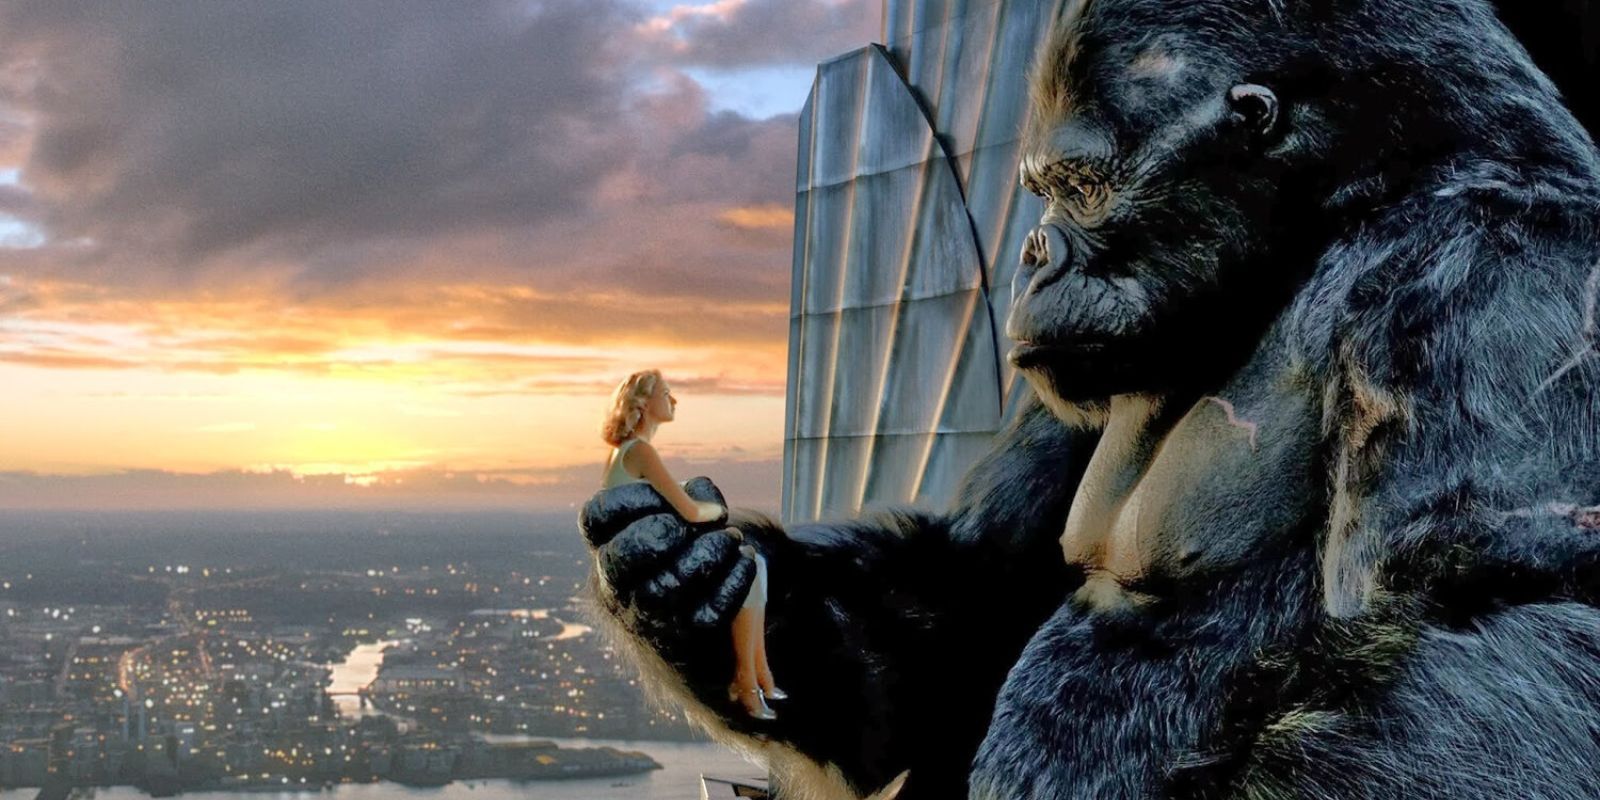 Anne Darrow being held by King Kong atop the Empire Sate Building in King Kong.